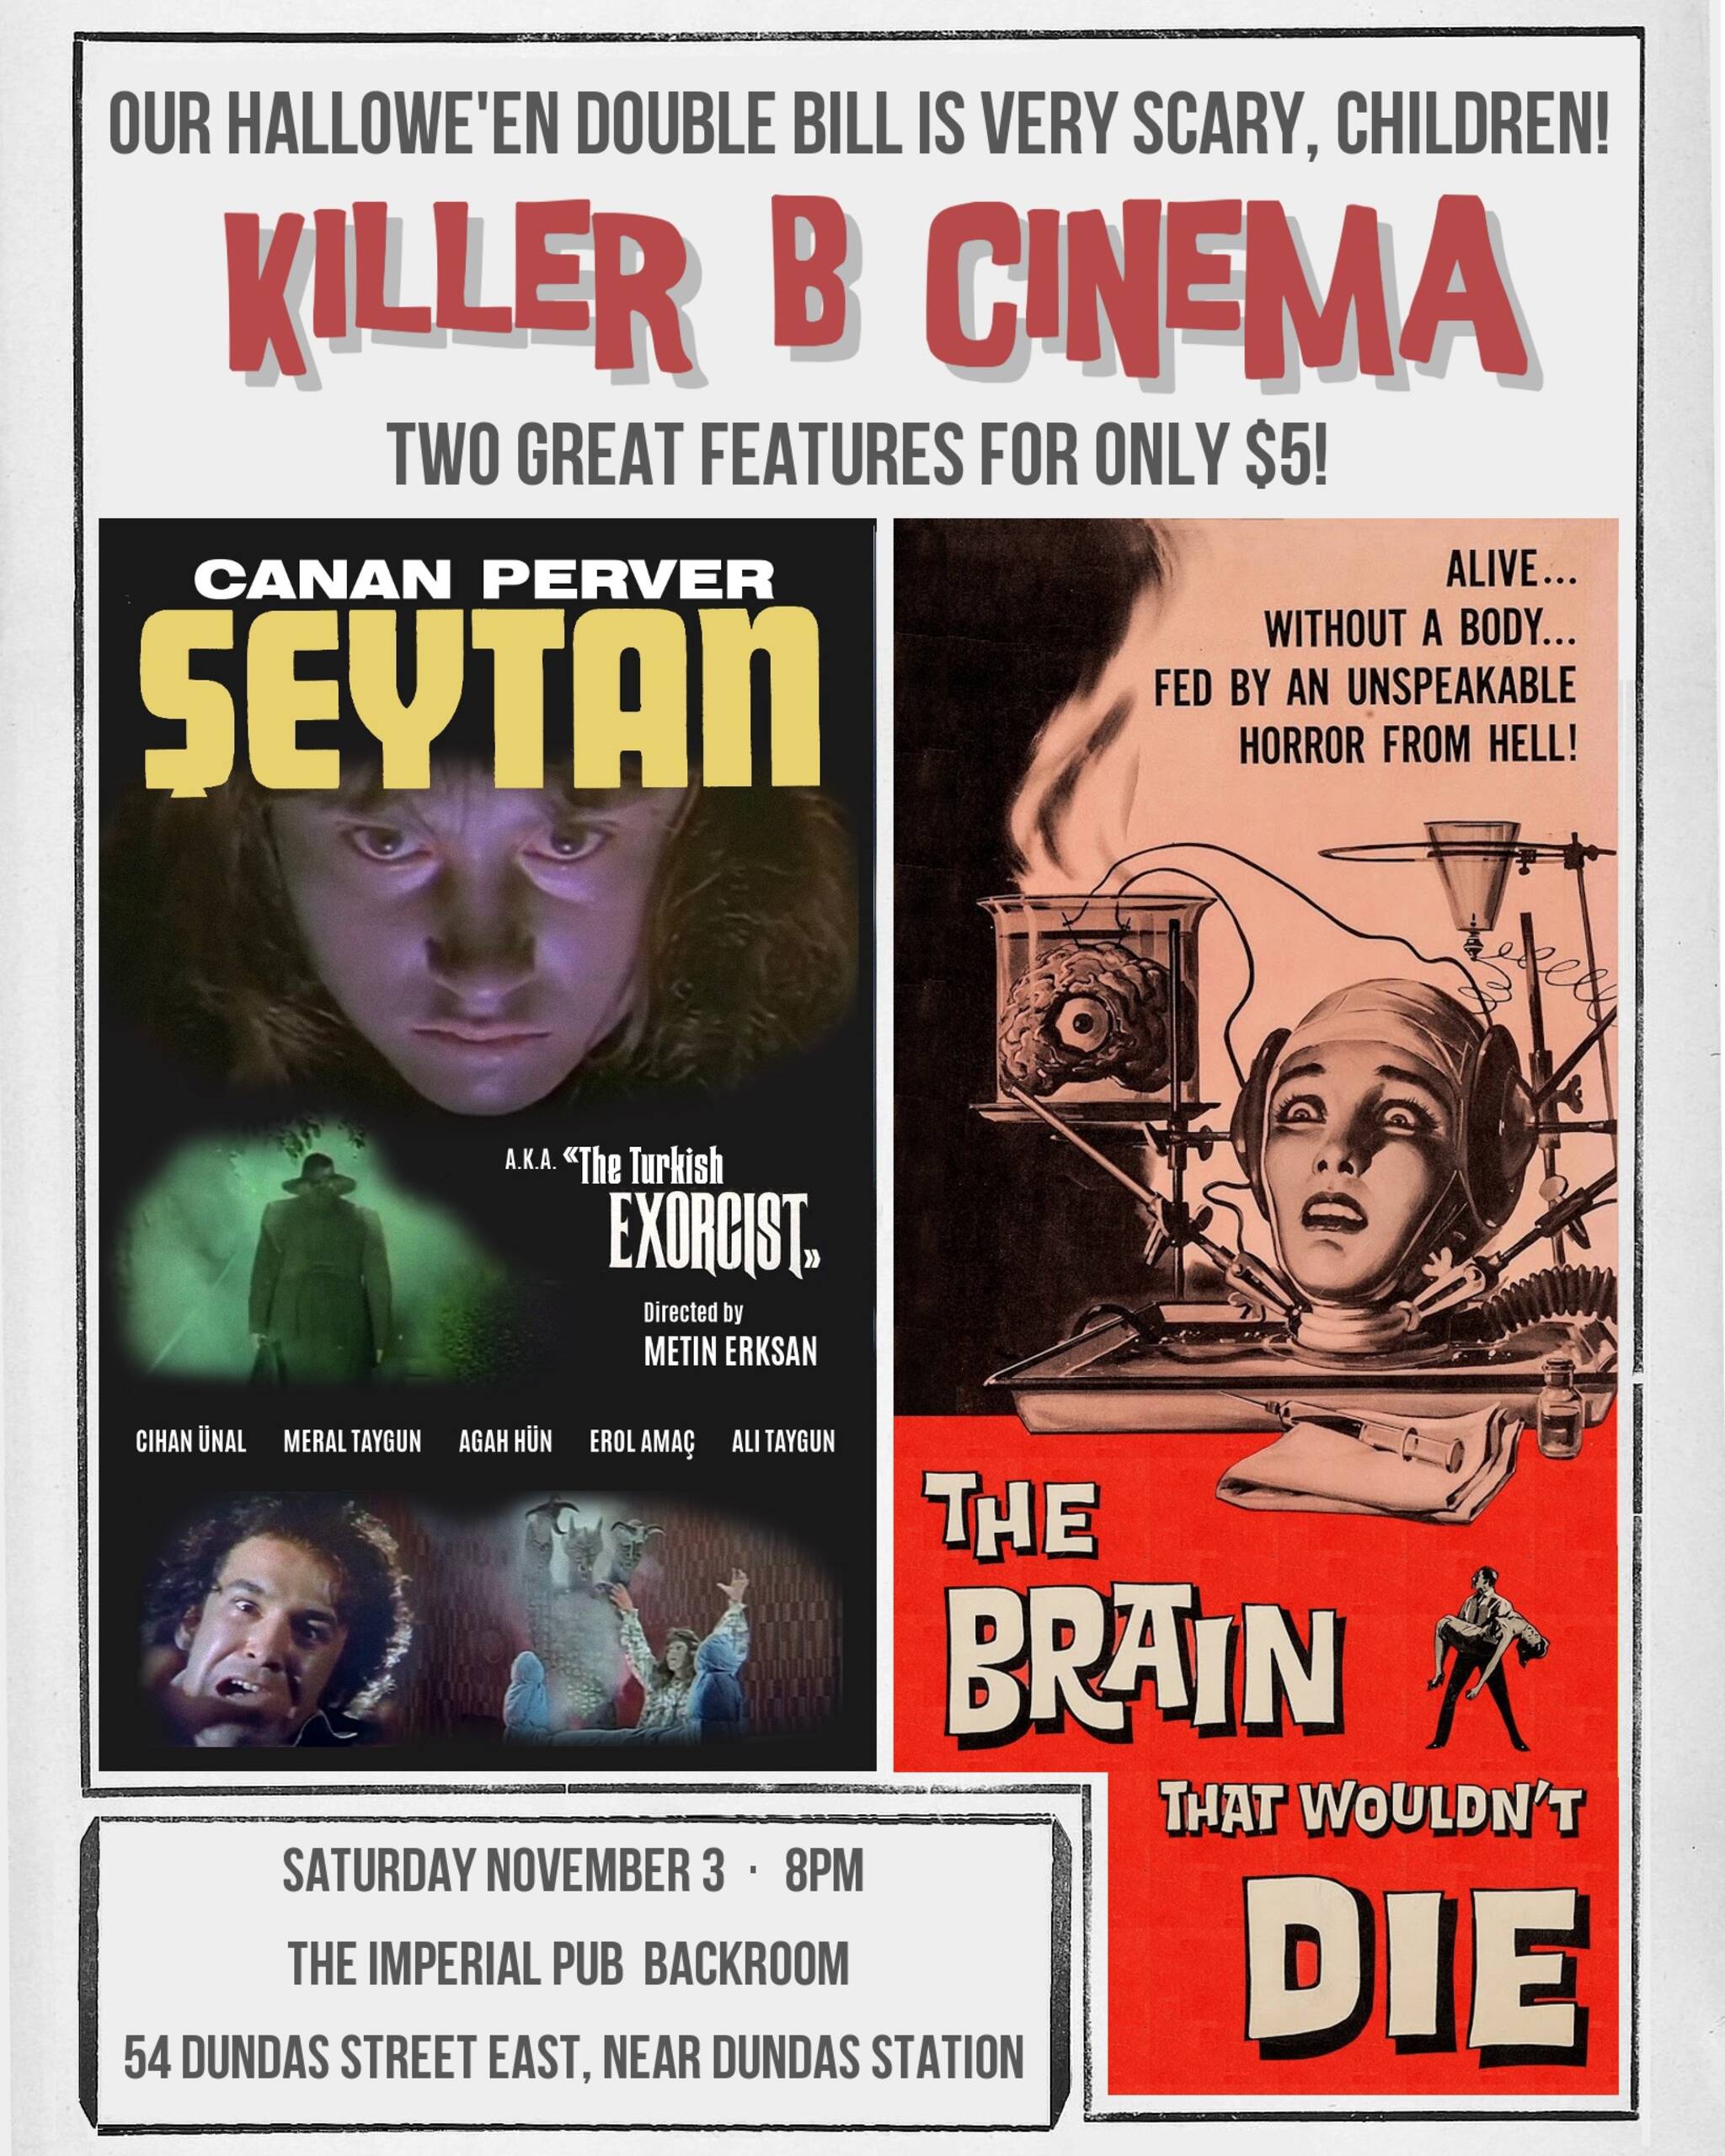 Killer B Cinema Presents Turkish Exorcist and The Brain That Wouldnt Die